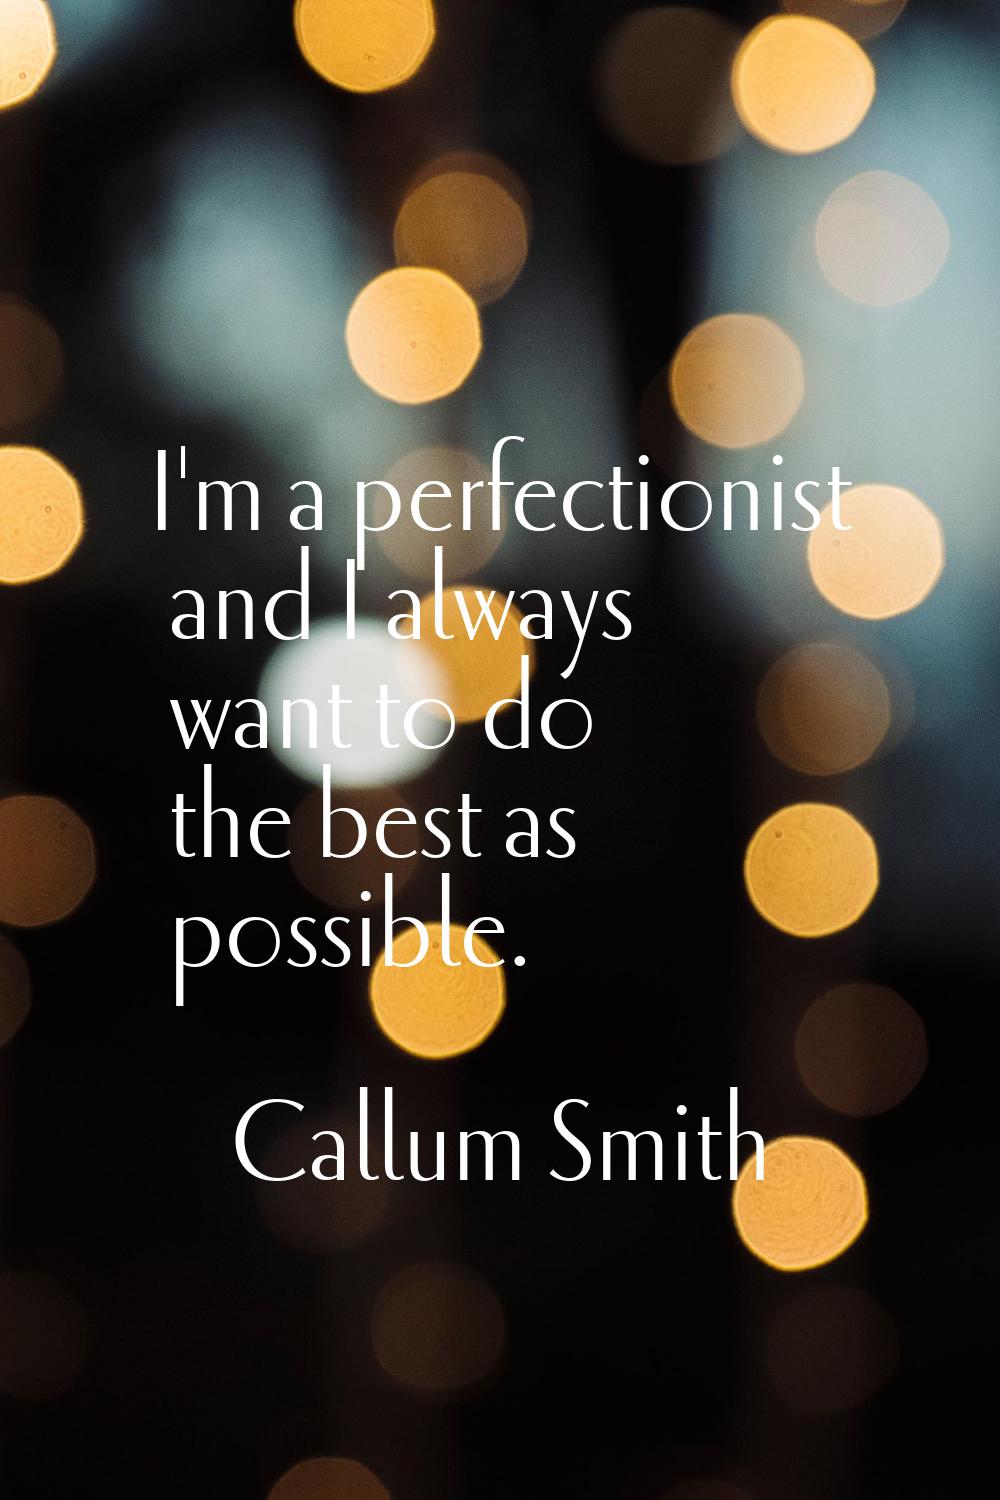 I'm a perfectionist and I always want to do the best as possible.